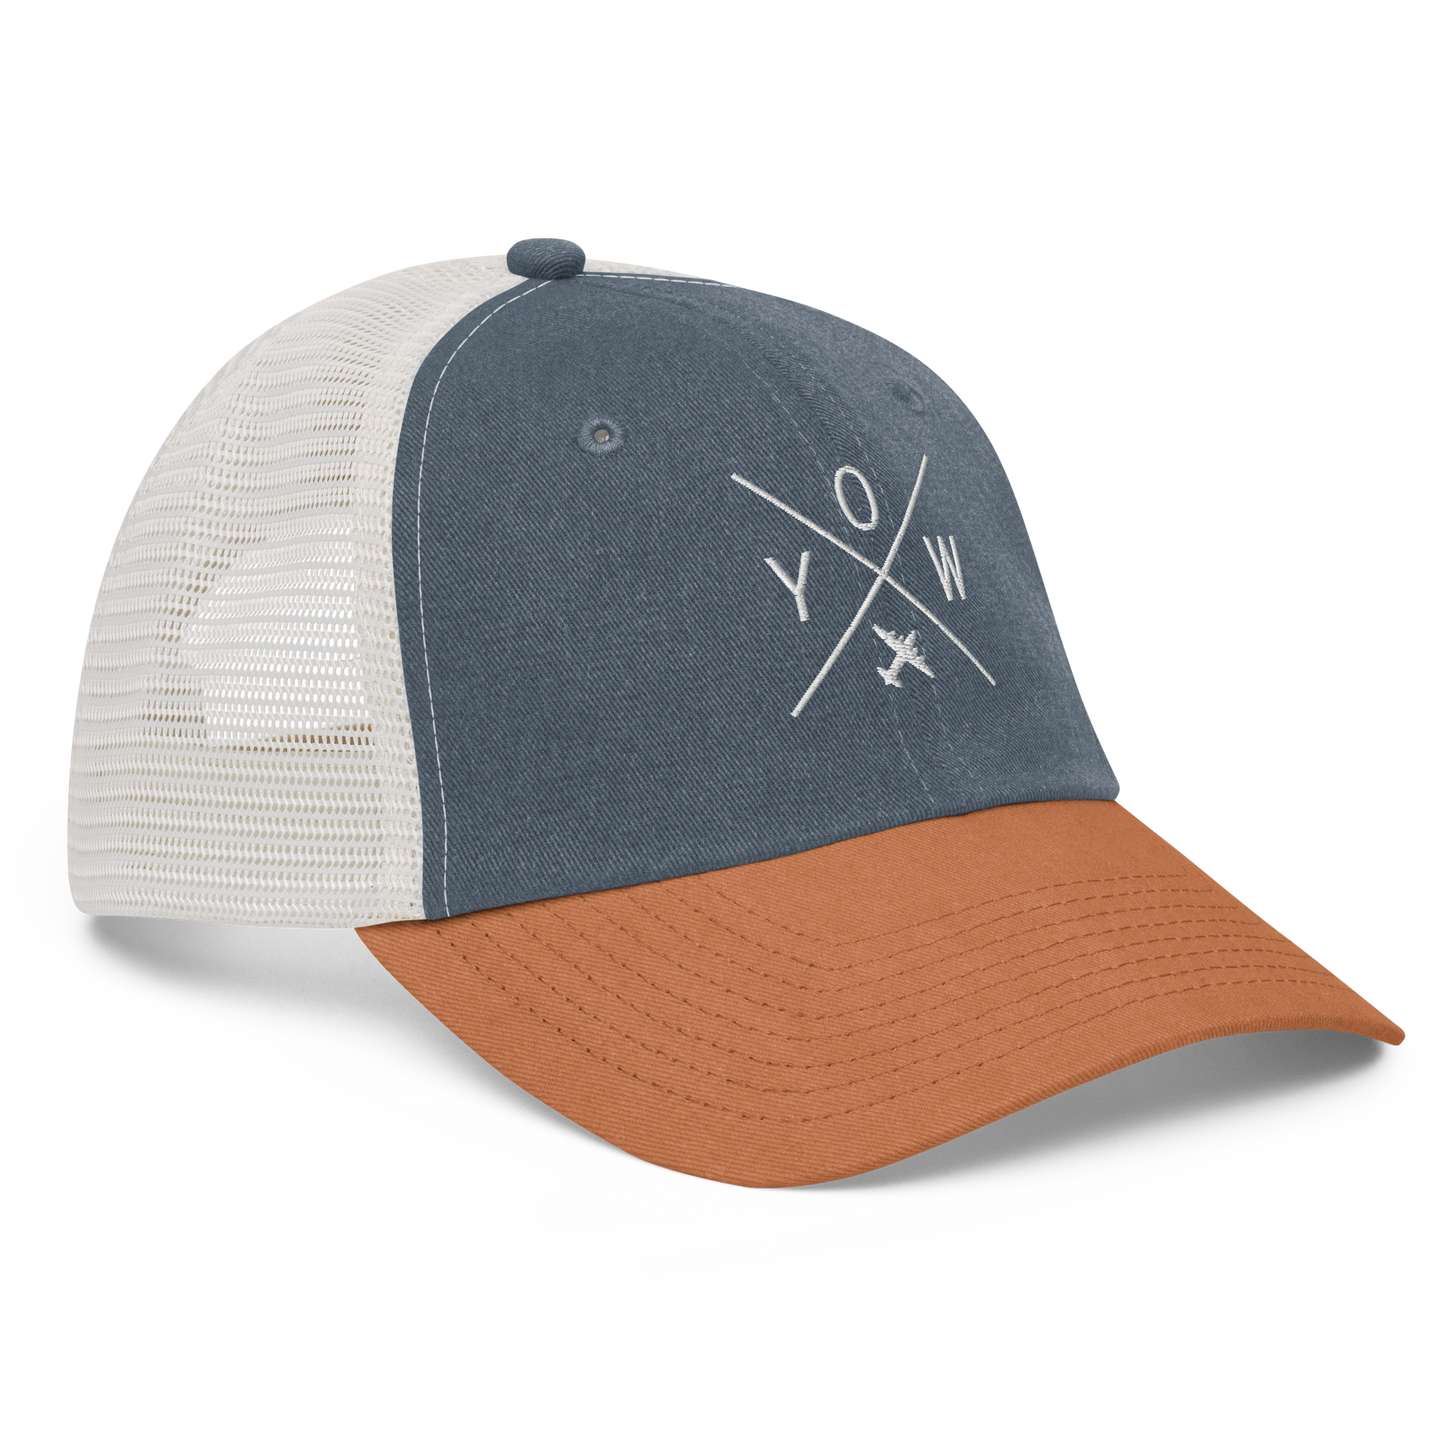 YHM Designs - YOW Ottawa Pigment-Dyed Trucker Cap - Crossed-X Design with Airport Code and Vintage Propliner - White Embroidery - Image 16